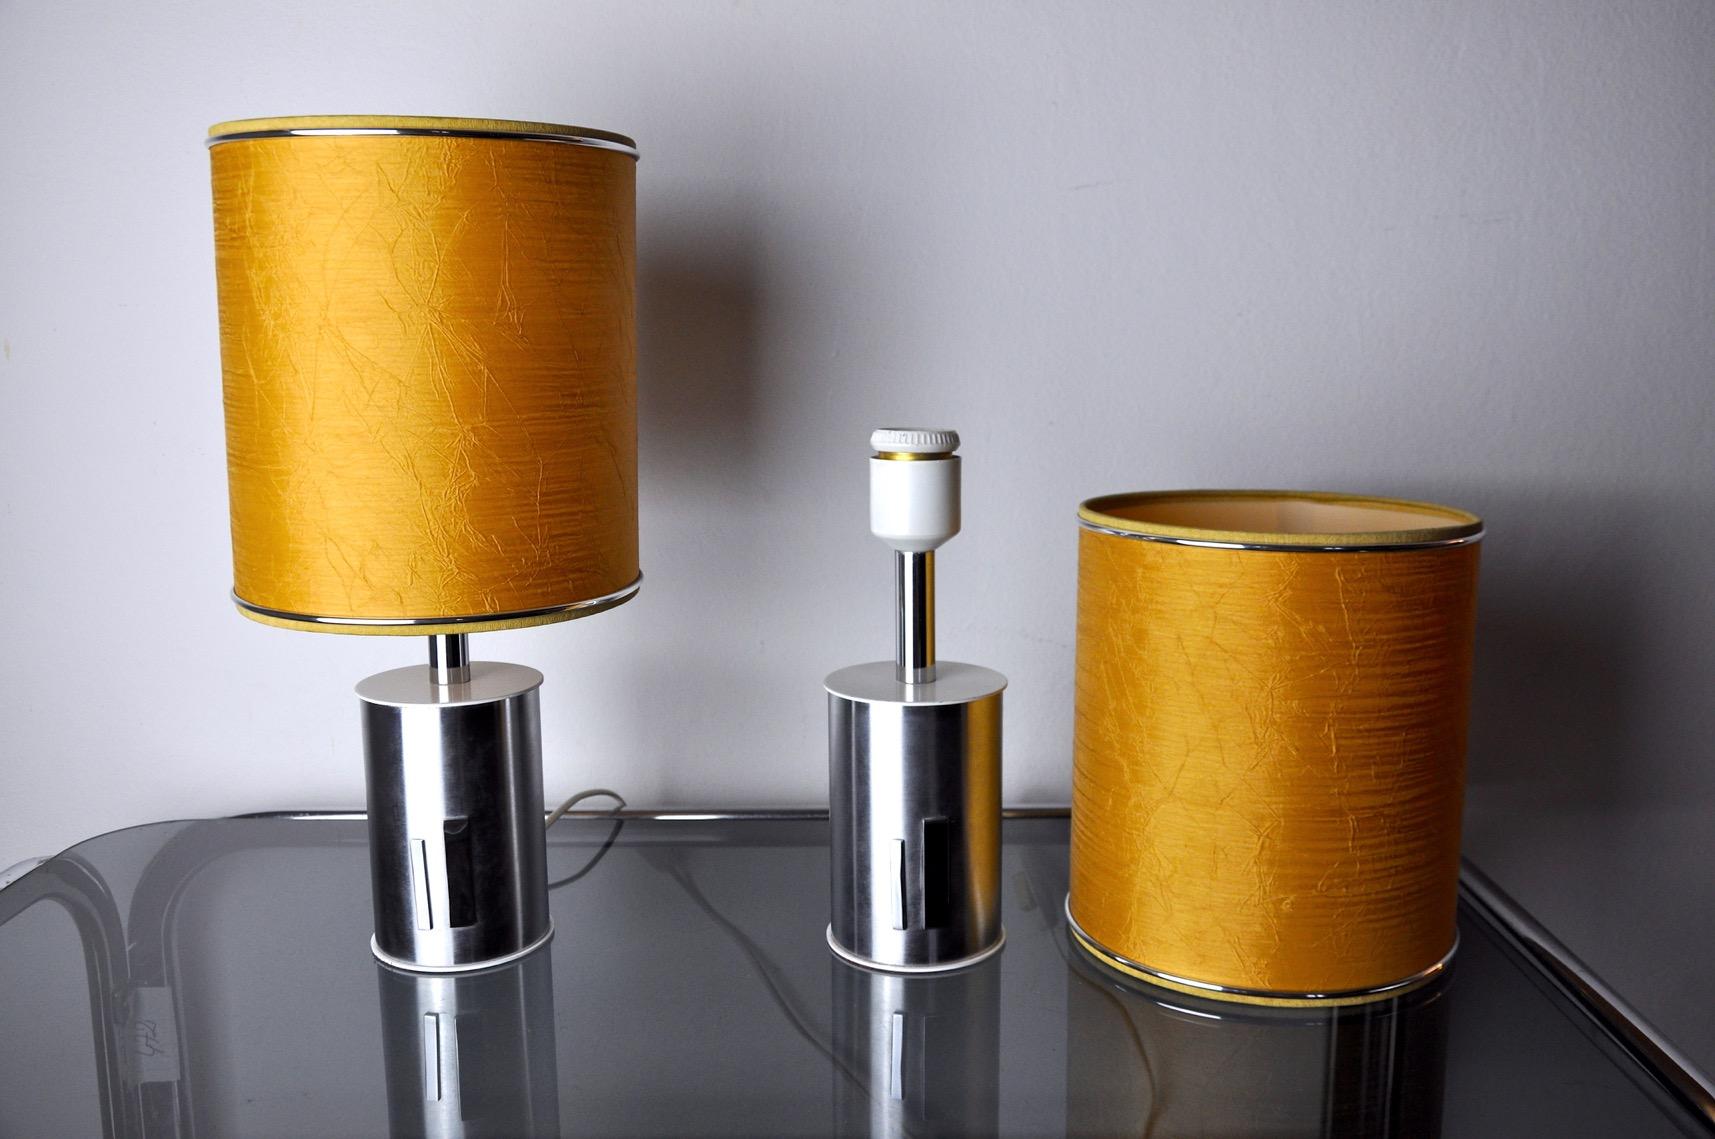 Pair of futuristic lamps by Marca SL, Spain, 1970s For Sale 3